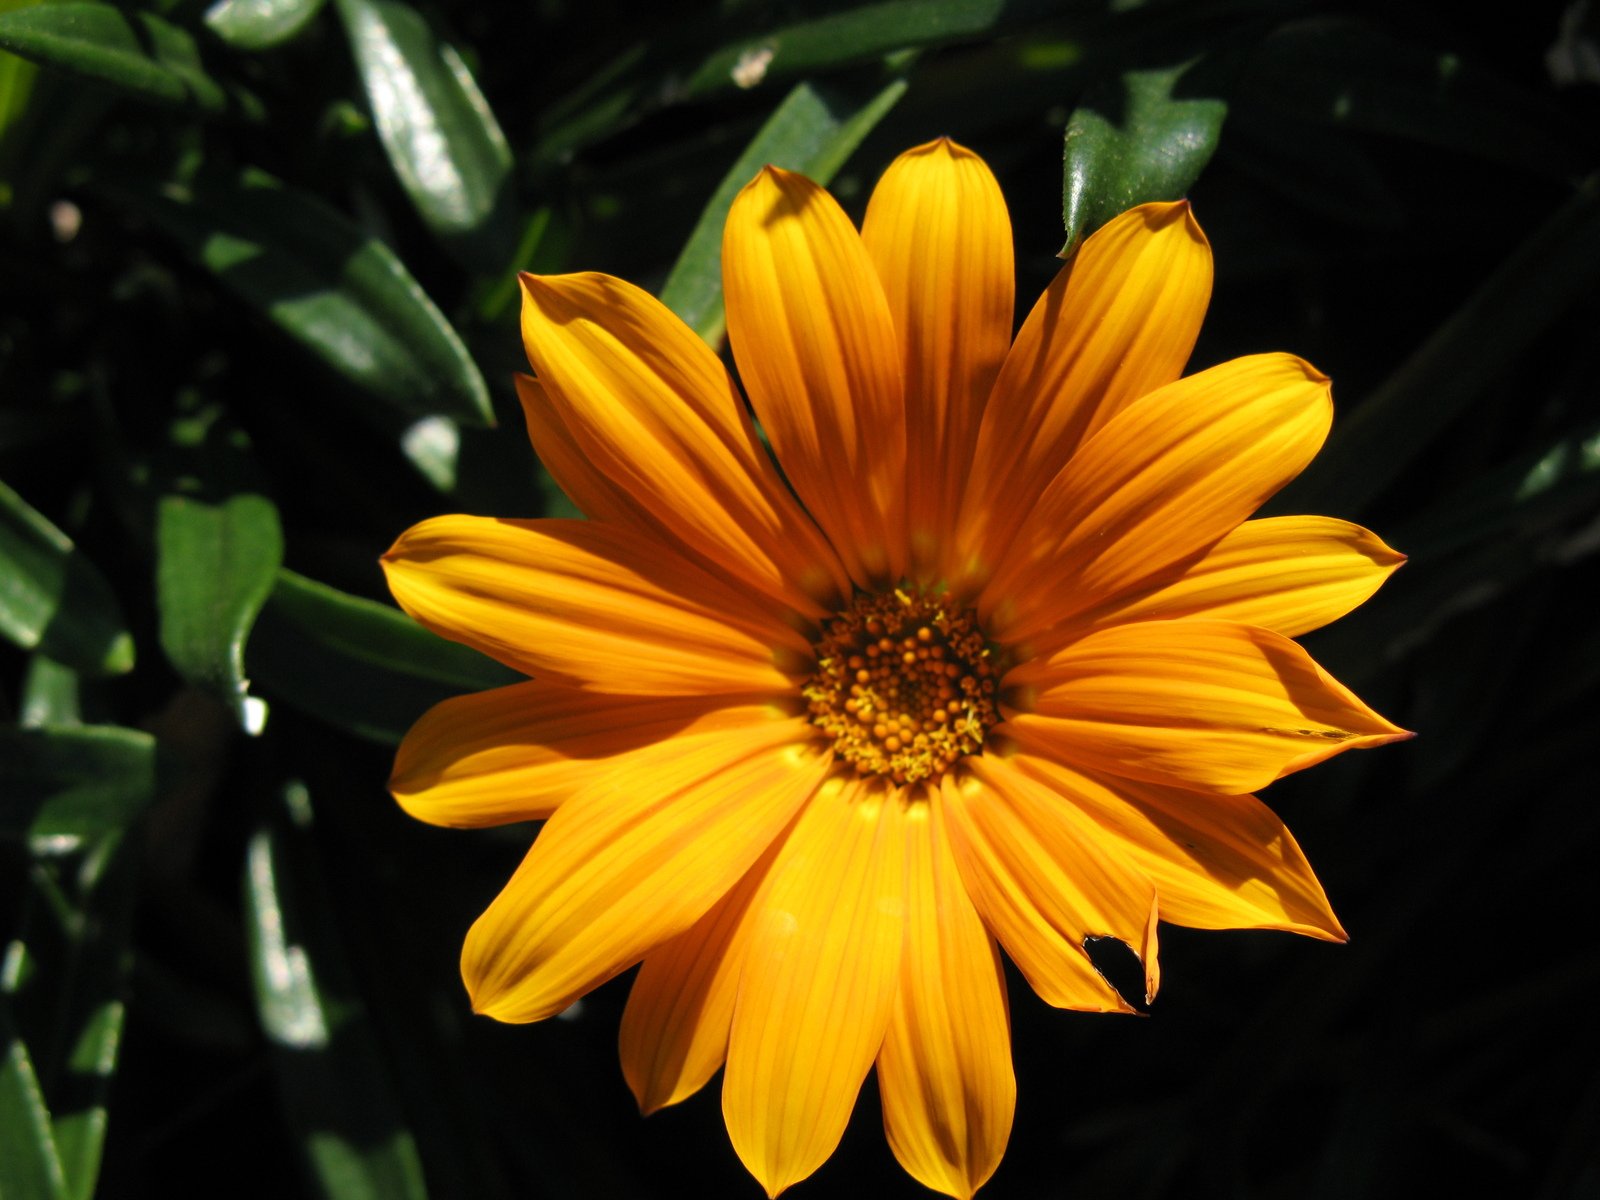 a sunflower with its bright yellow petals